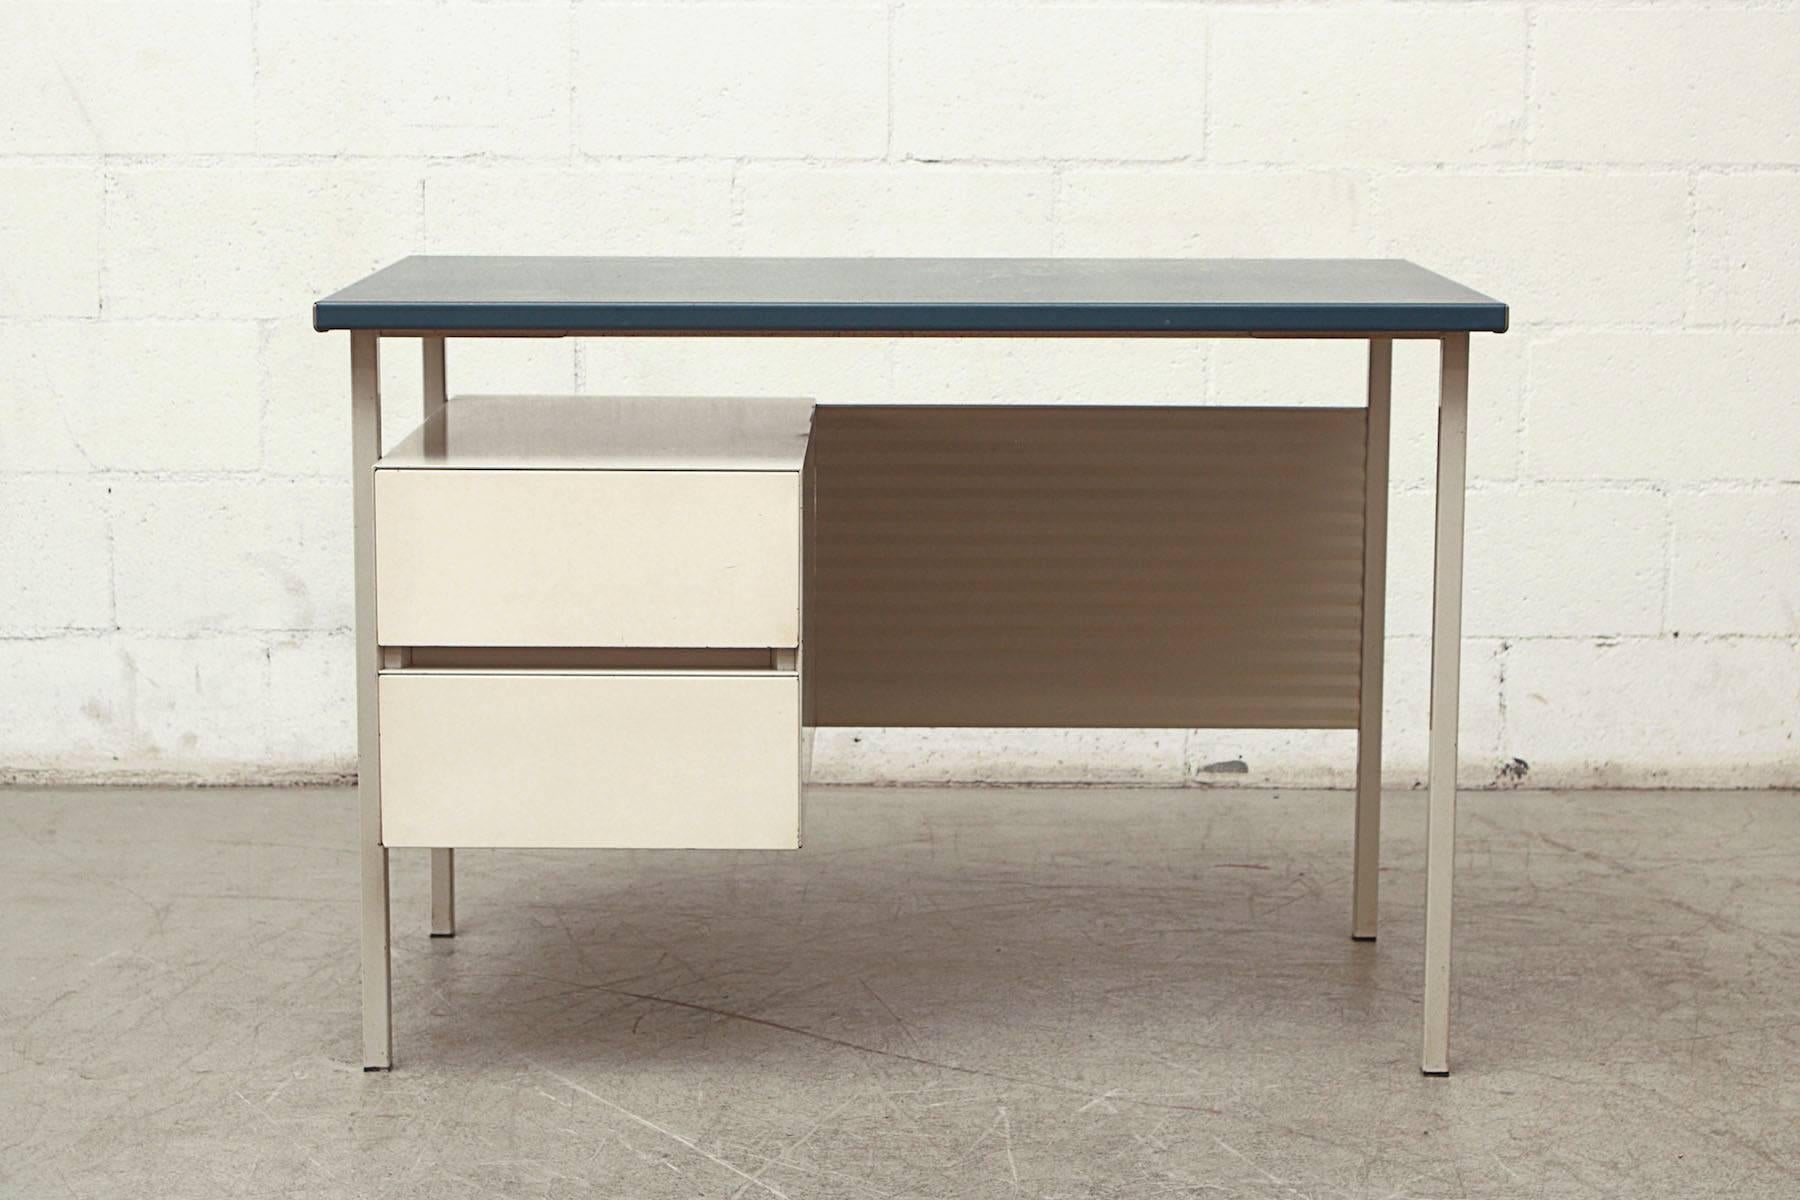 Edition Georges Dreyfus Parisgispen model 3803 by A.R. Cordemeyer. Cute little light grey enameled metal desk with matching enameled corrugated privacy screen and blue vinyl wrapped top and bone white enameled drawer faces. Original condition with